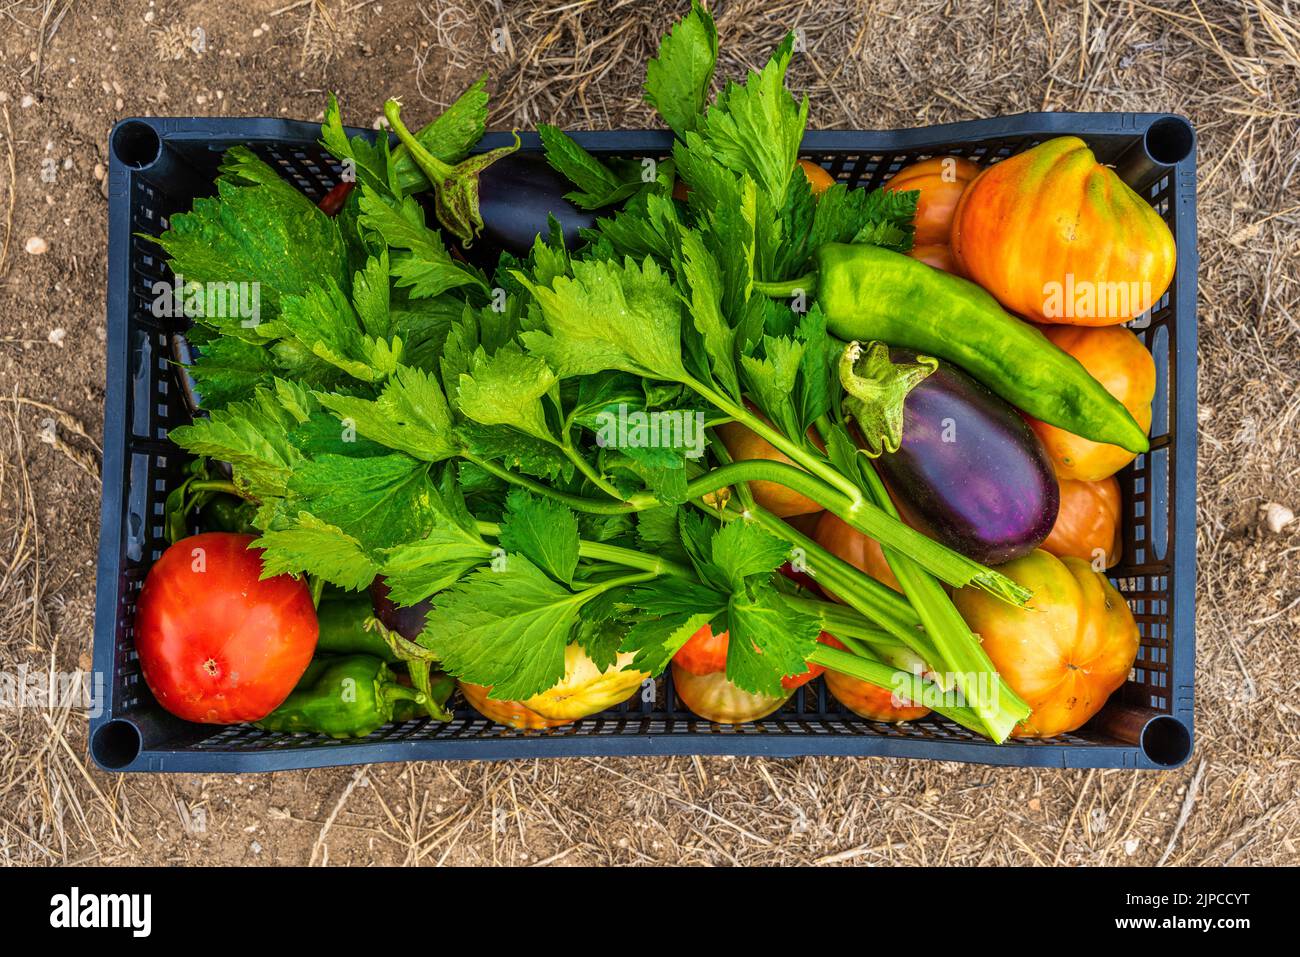 Vegetable box, tomato, celery, pepper and aubergine. Vegetables from organic garden. Abruzzo, Italy, Europe Stock Photo